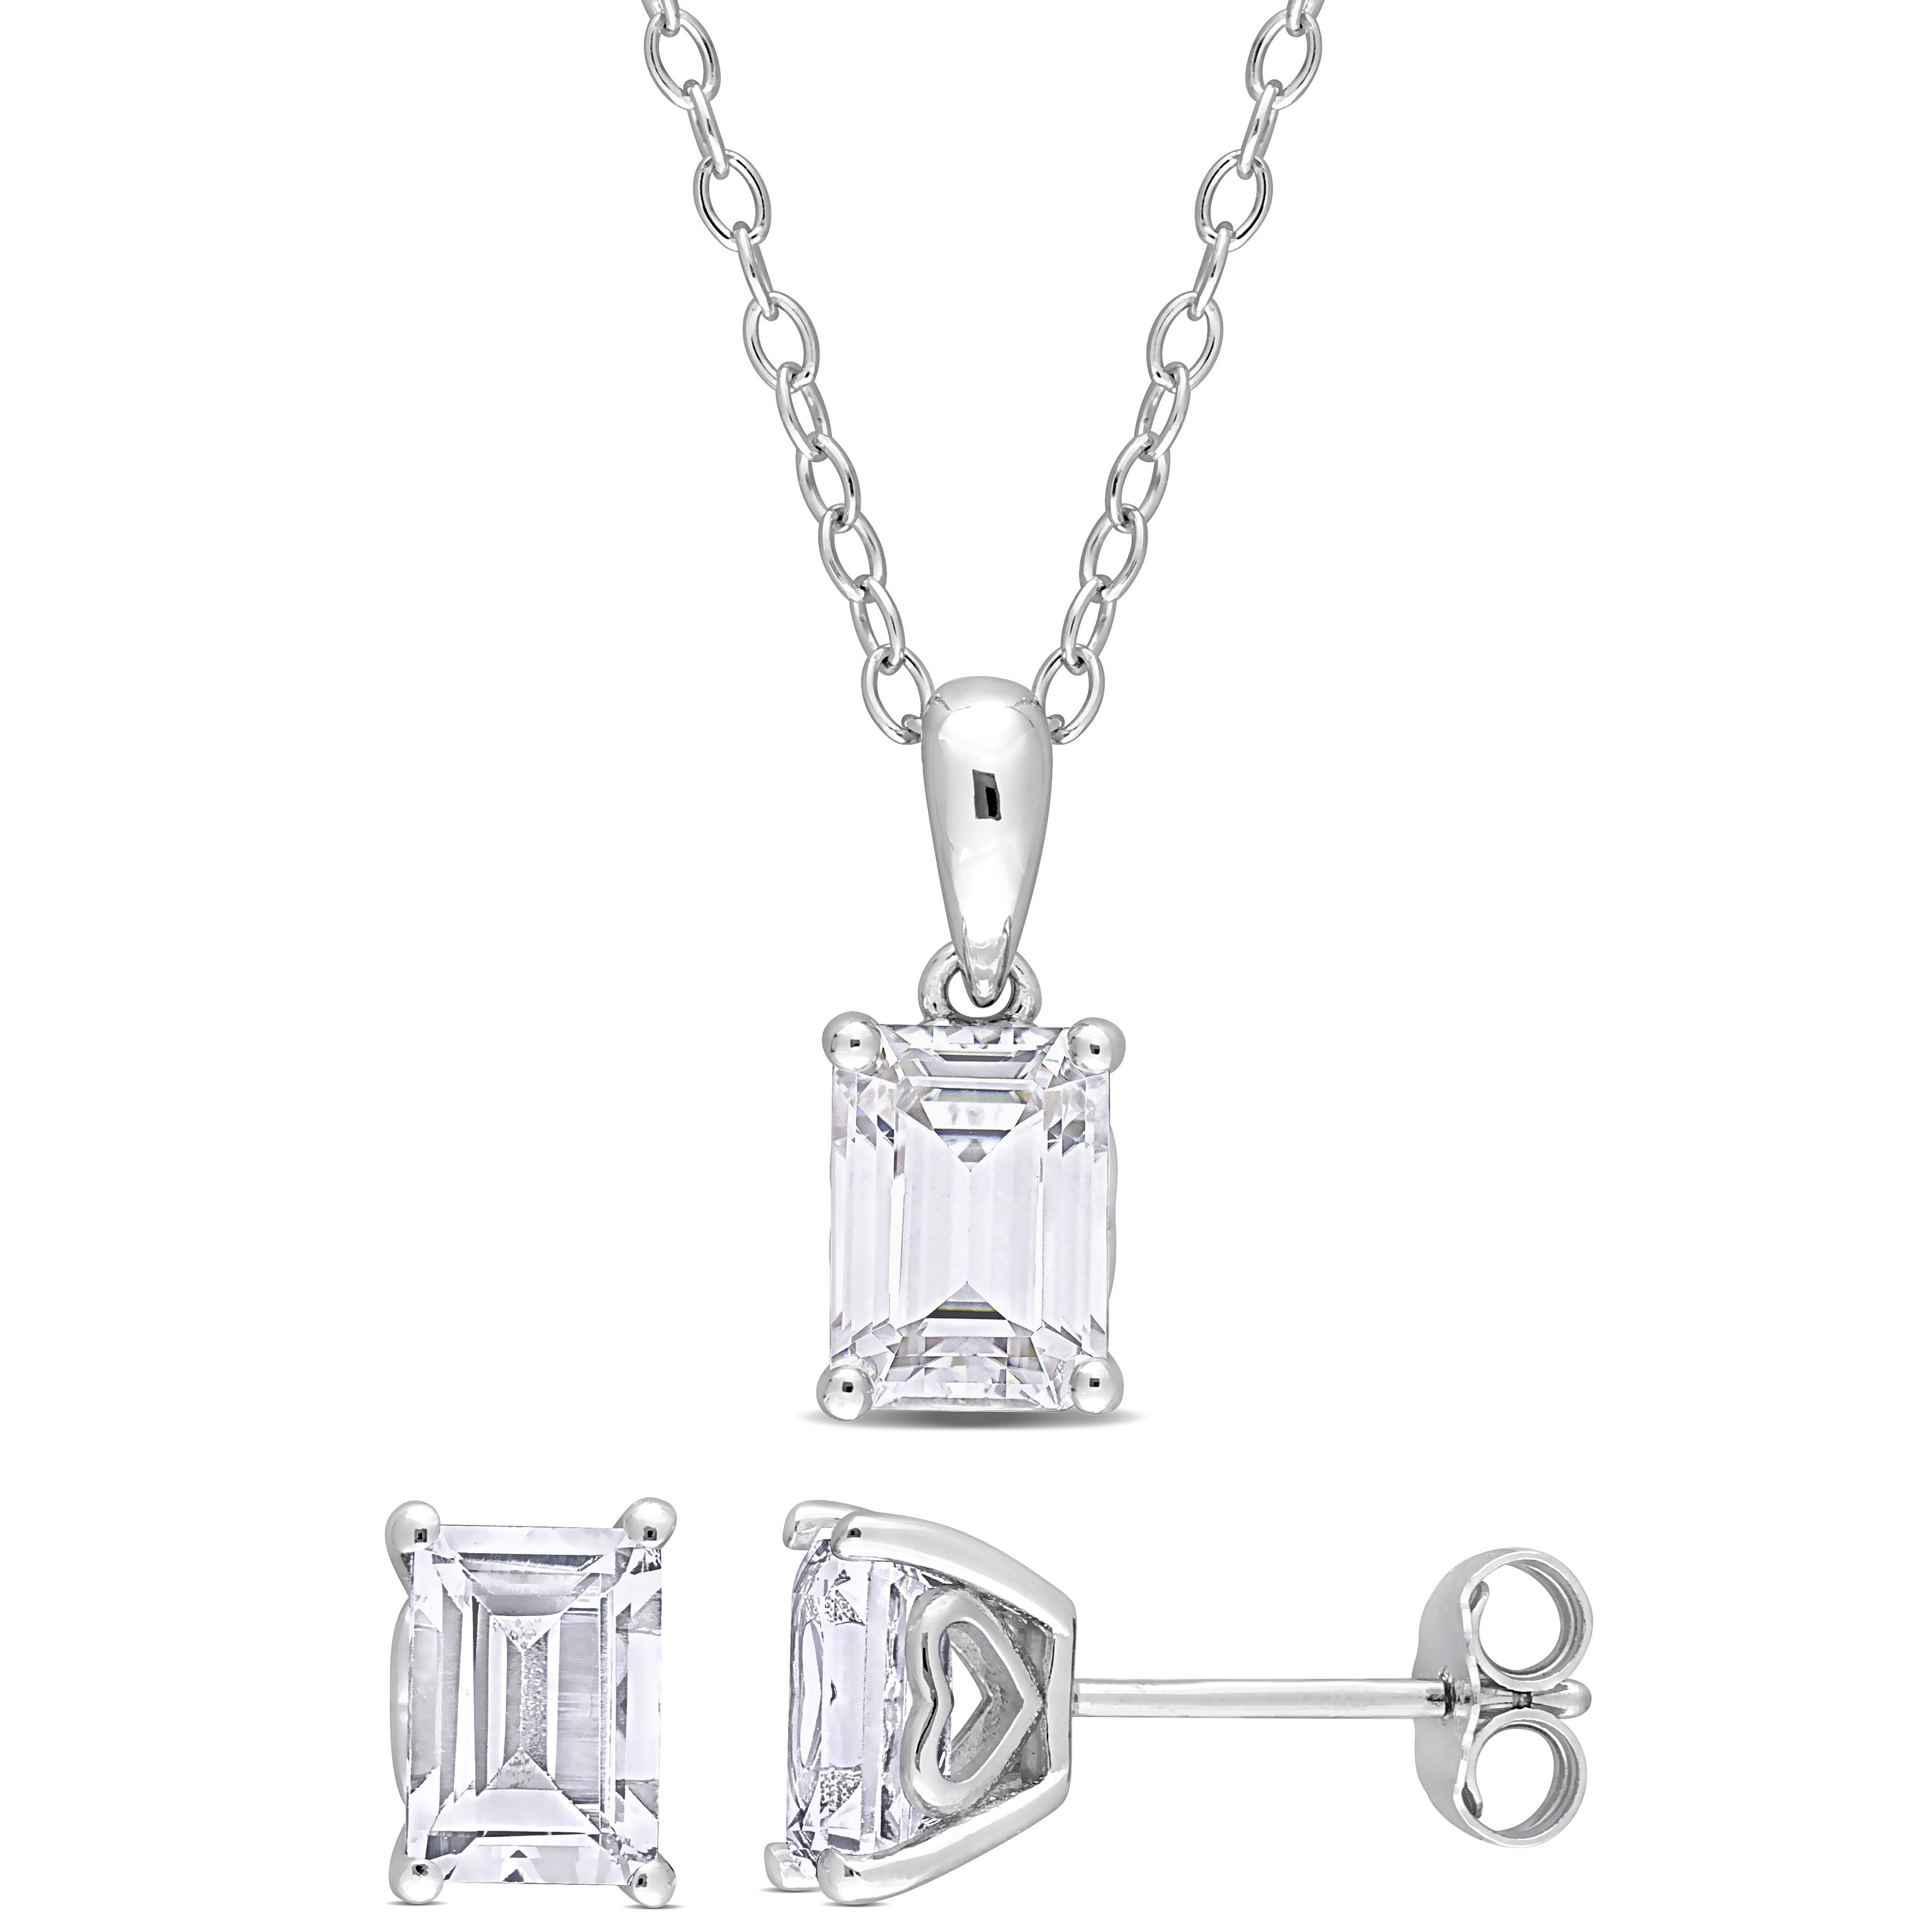 3 3/4 CT TGW Emerald-Cut and Octagon White Topaz 2-Piece Solitaire Pendant with Chain and Stud Earrings Set in Sterling Silver